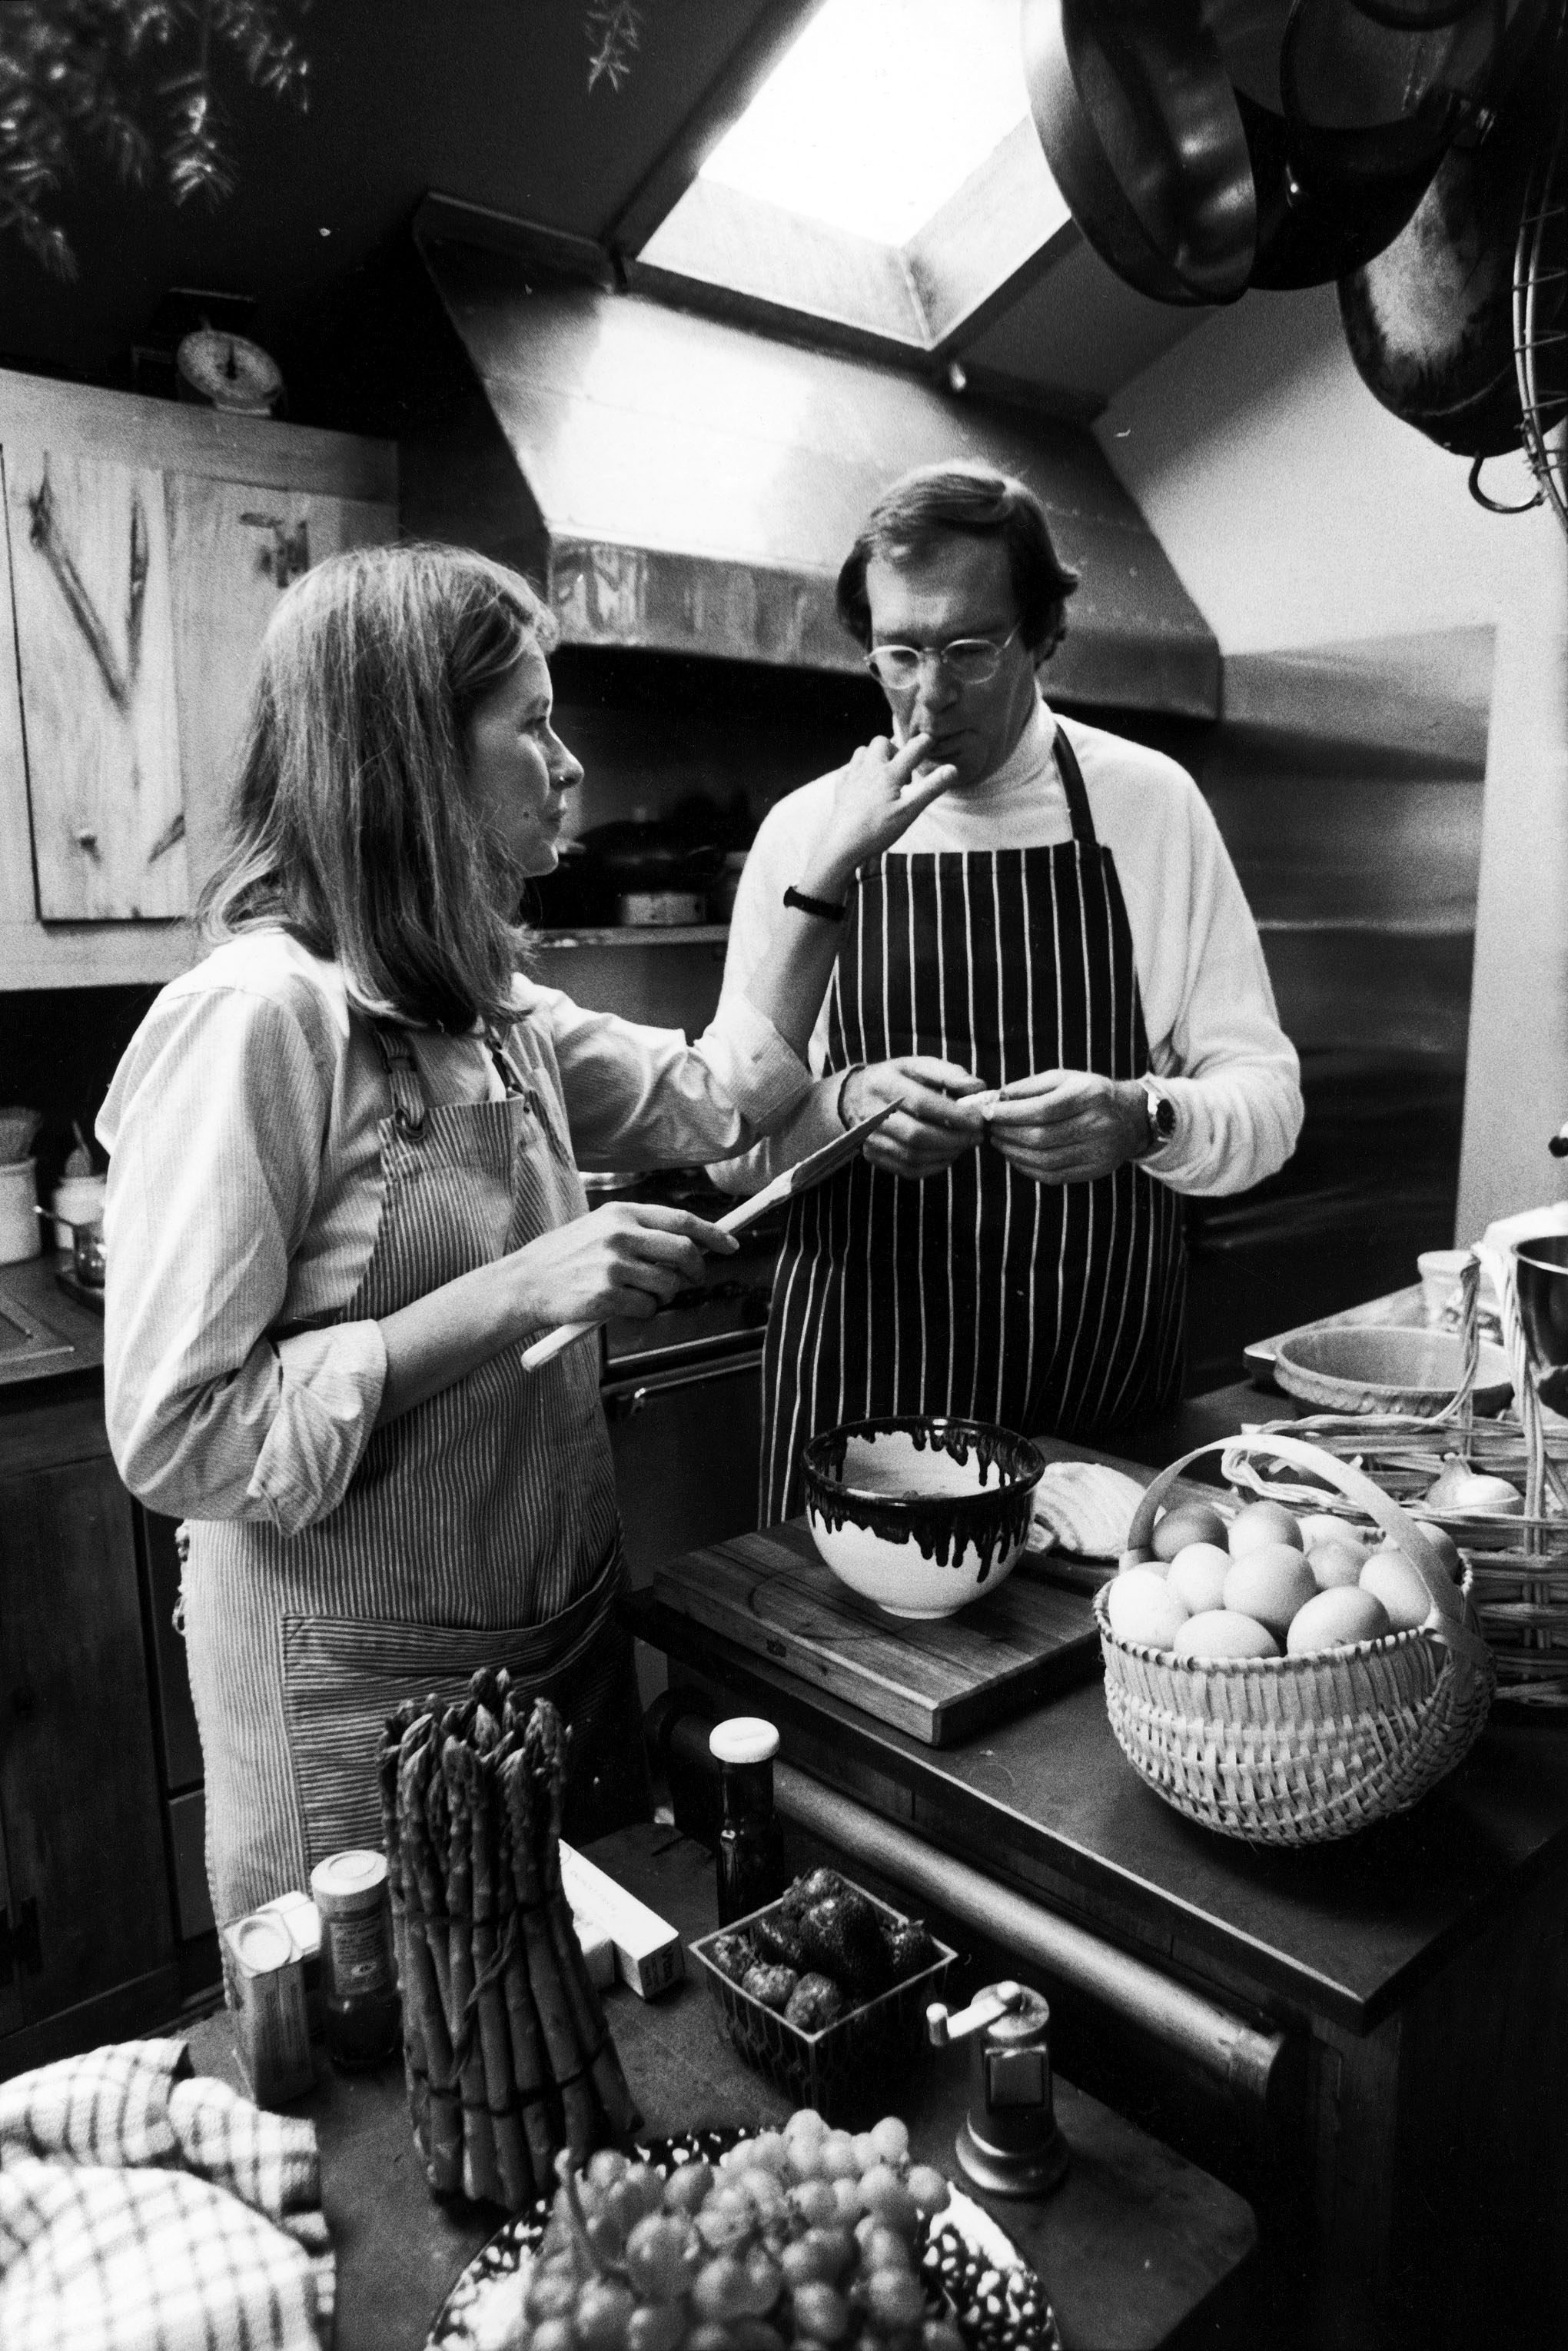 Martha and Andrew Stewart, baking in their kitchen on March 24, 1980. | Source: Getty Images